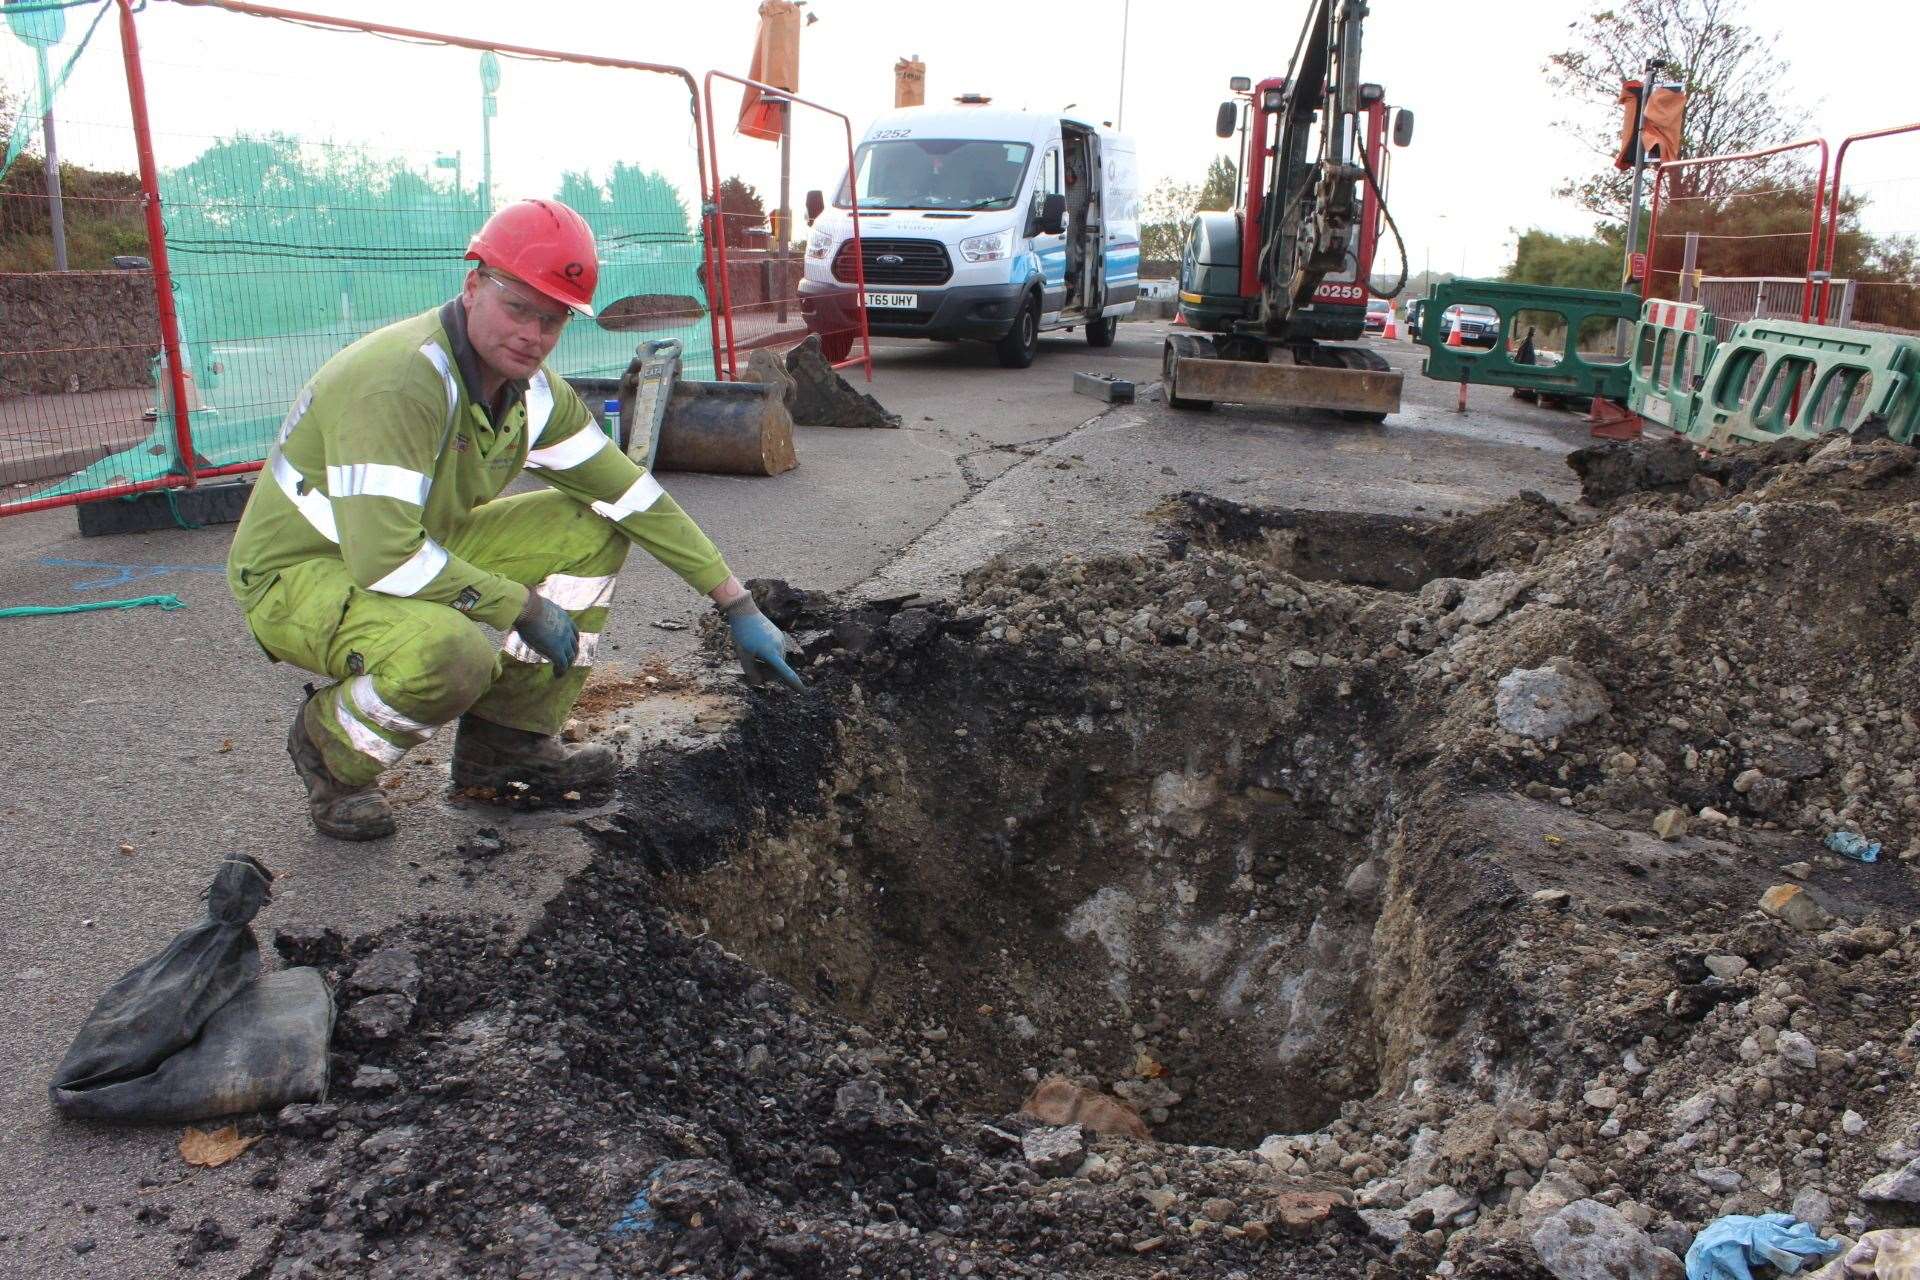 Ben Jeffery of Clancy Docwra studies part of the 11-inch water main at the canal in Sheerness back in 2017